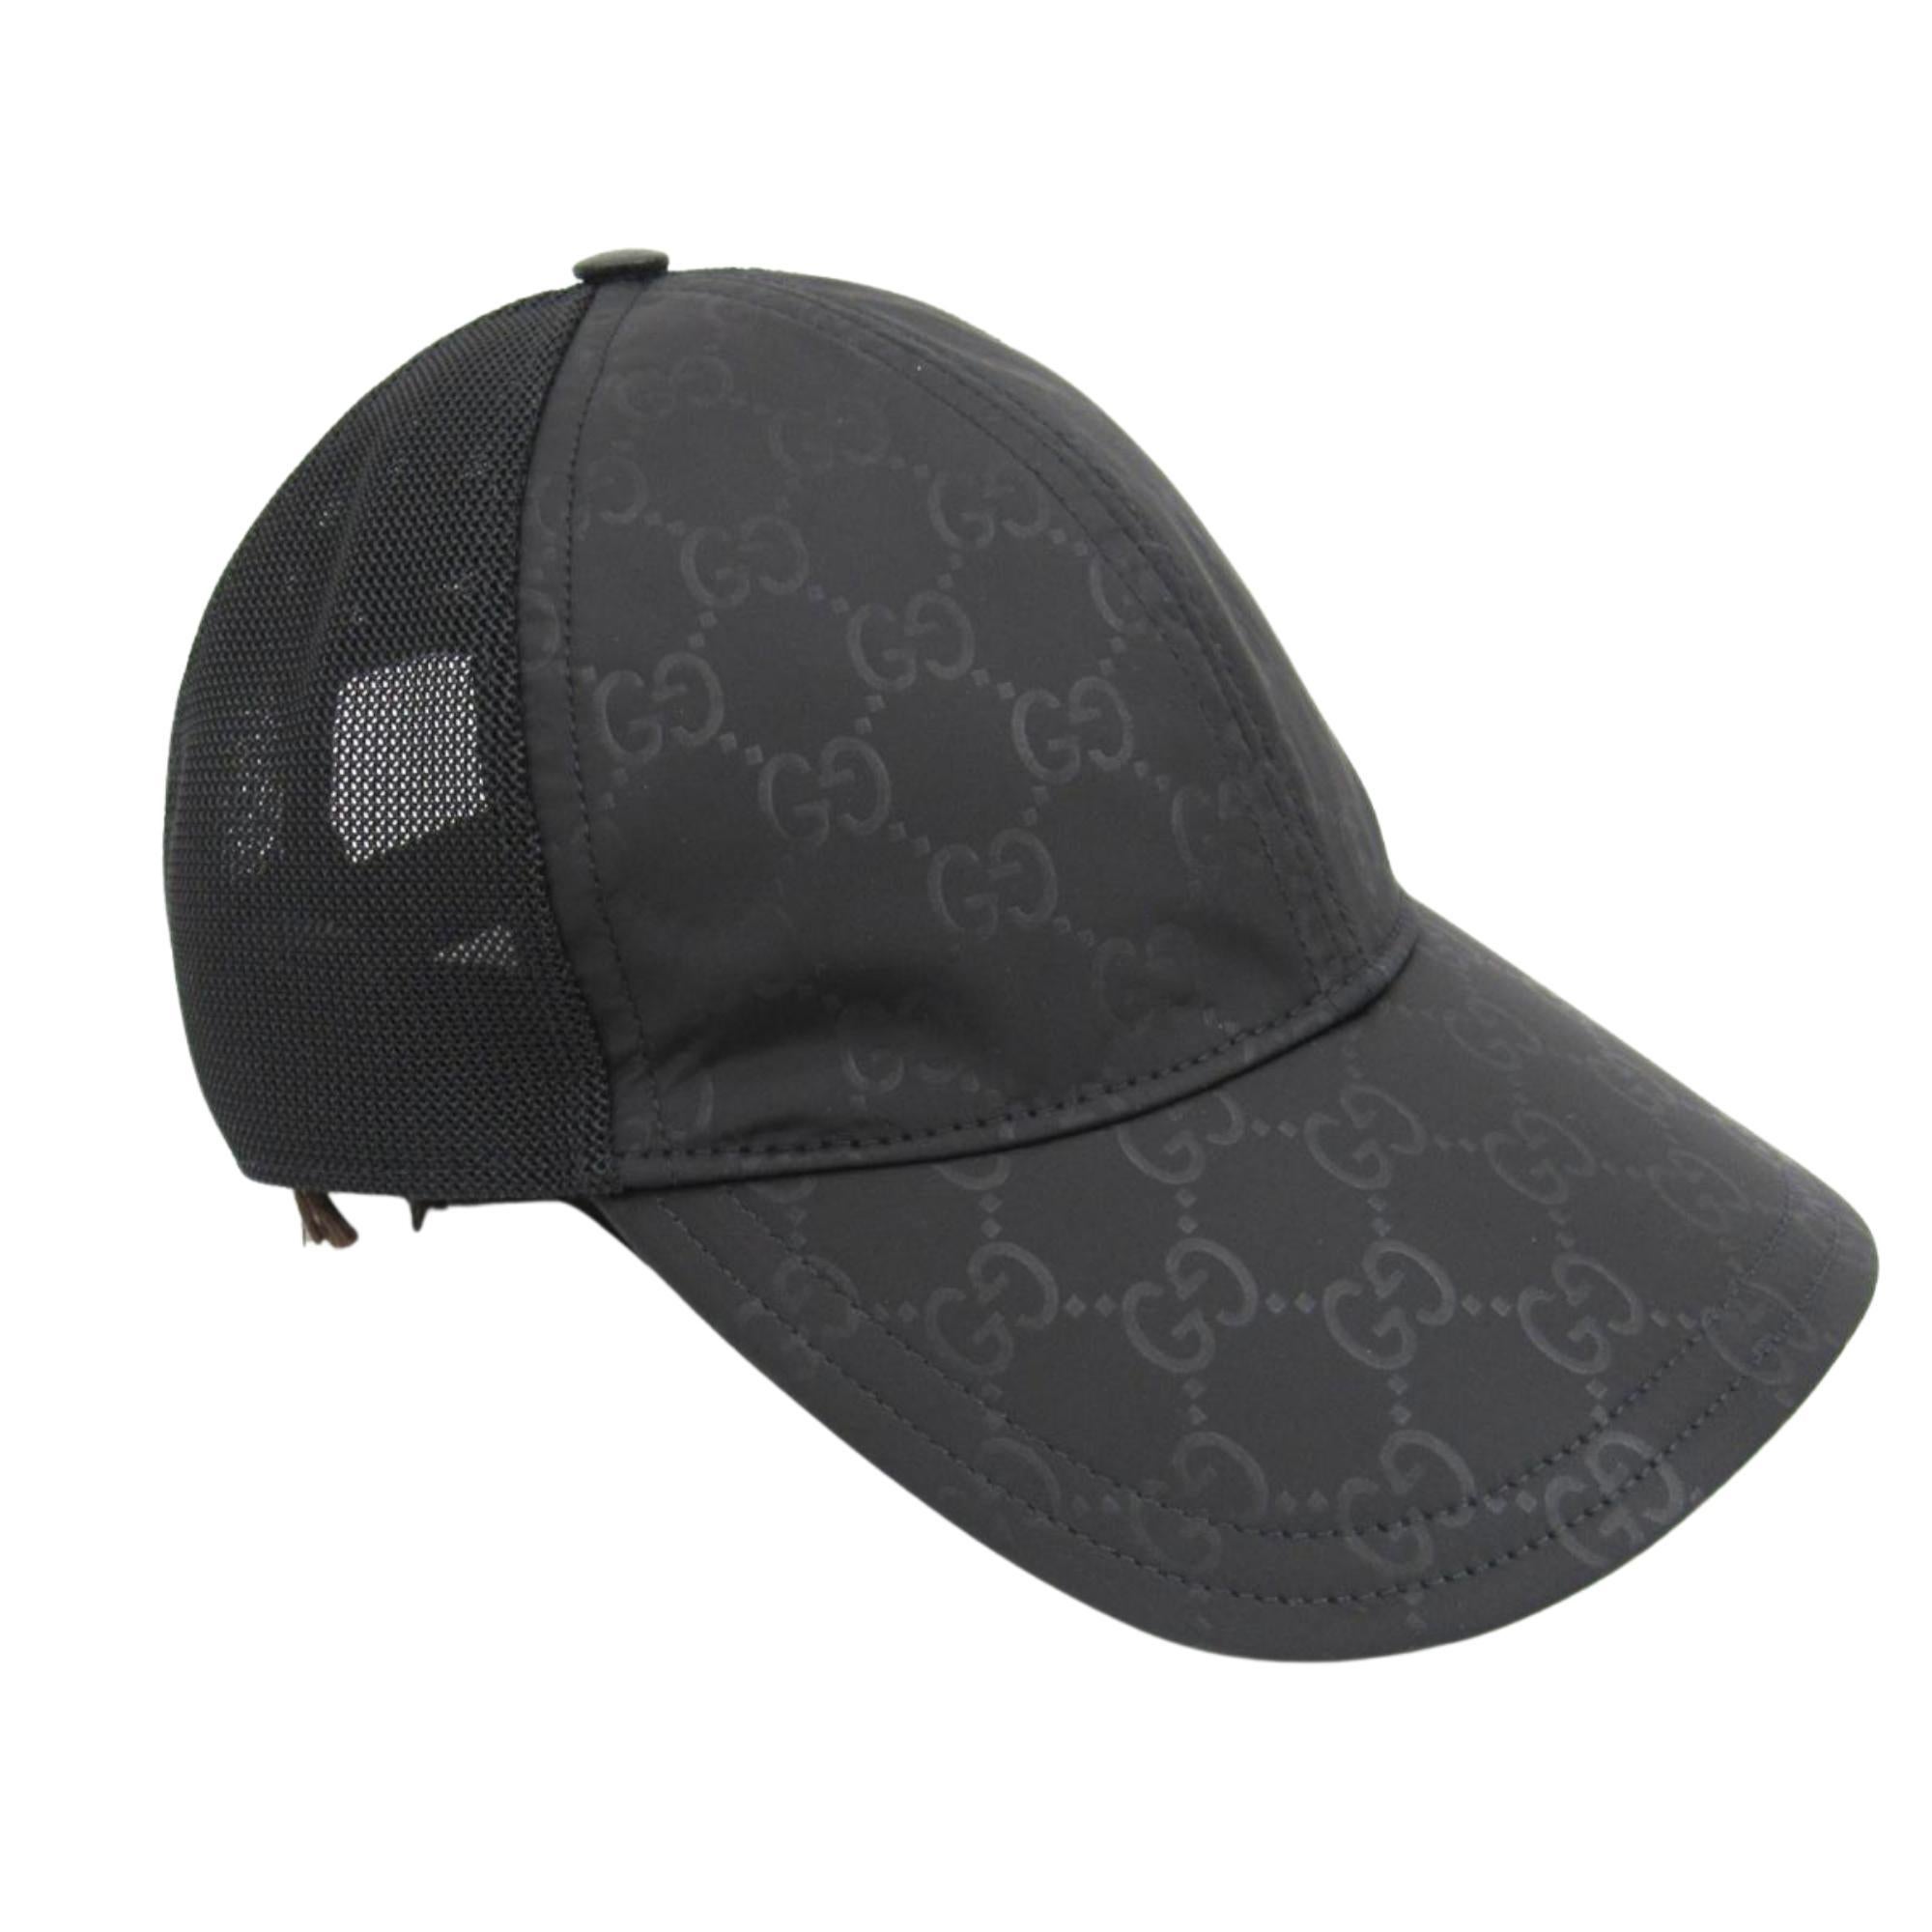 This cap is made of traditional black Gucci GG monogram nylon. The cap features a mesh back and an adjustable closure.

COLOR: Black
MATERIAL: Nylon
ITEM CODE: 510950
SIZE: Small 57 cm 
COMES WITH: Tags
CONDITION: Excellent - faint hairline marks.